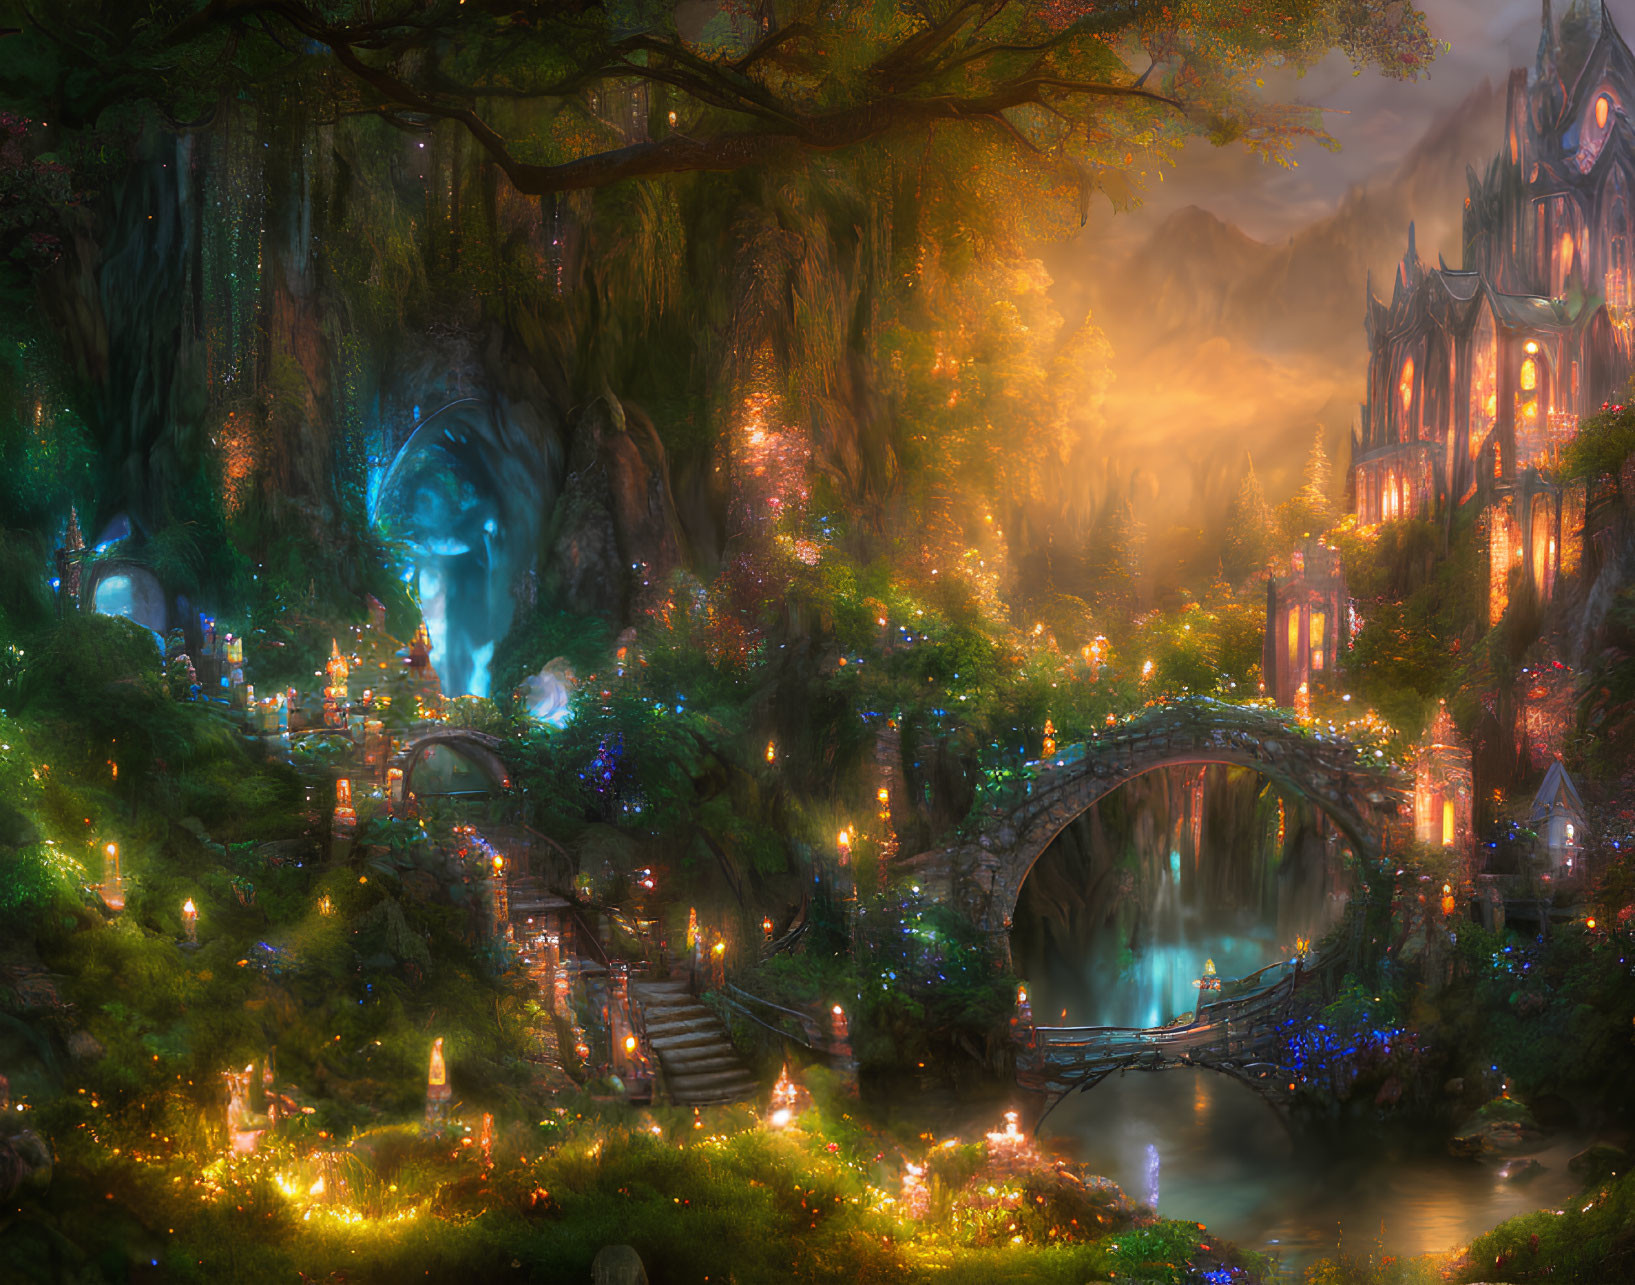 Enchanting forest scene with glowing lights, ornate bridge, and mystical castle